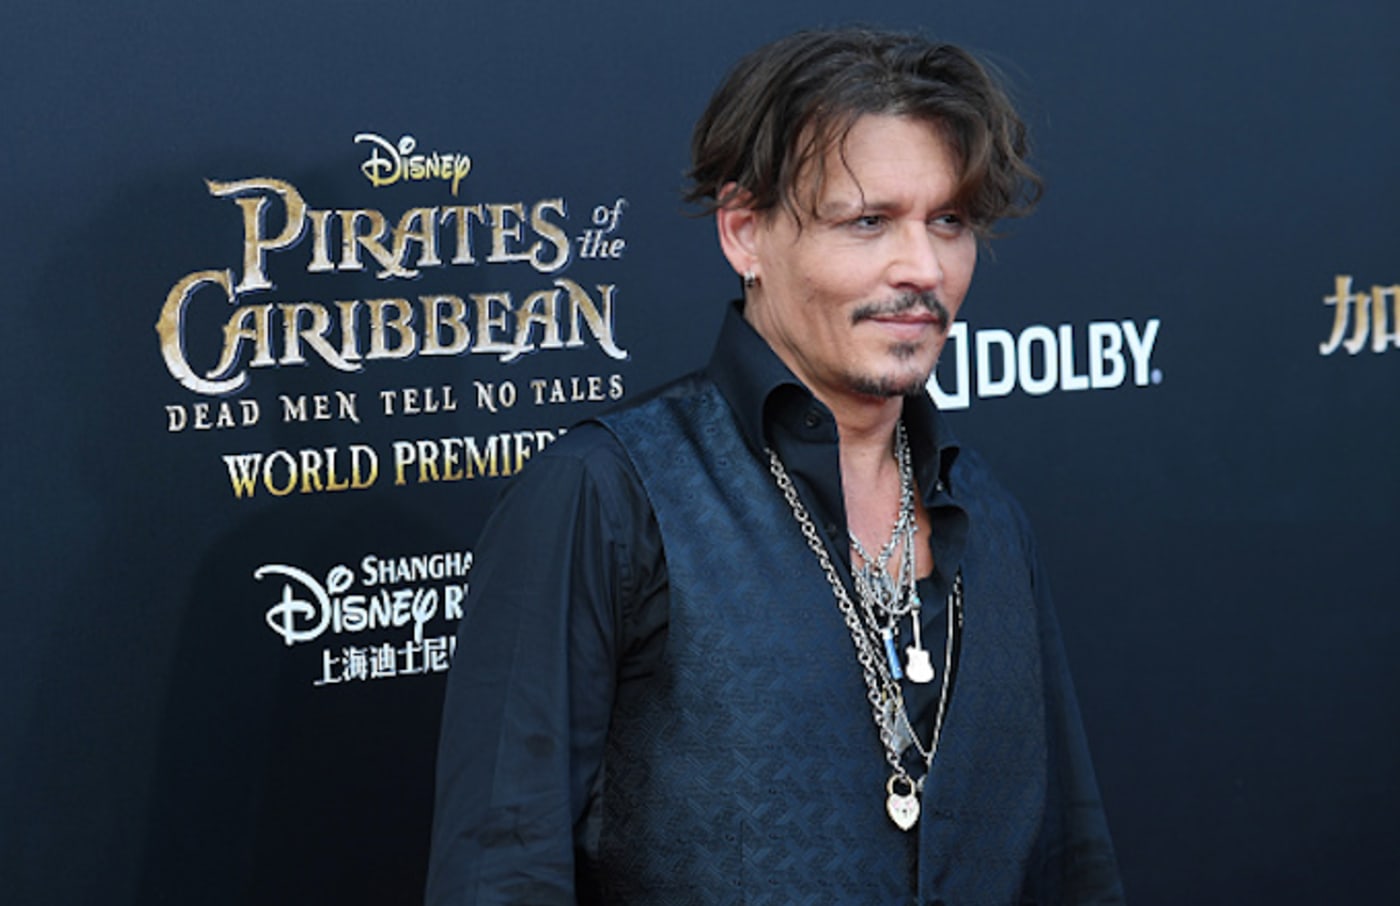 Johnny Depp attends the premiere of film 'Pirates of the Caribbean: Dead Men Tell No Tales'